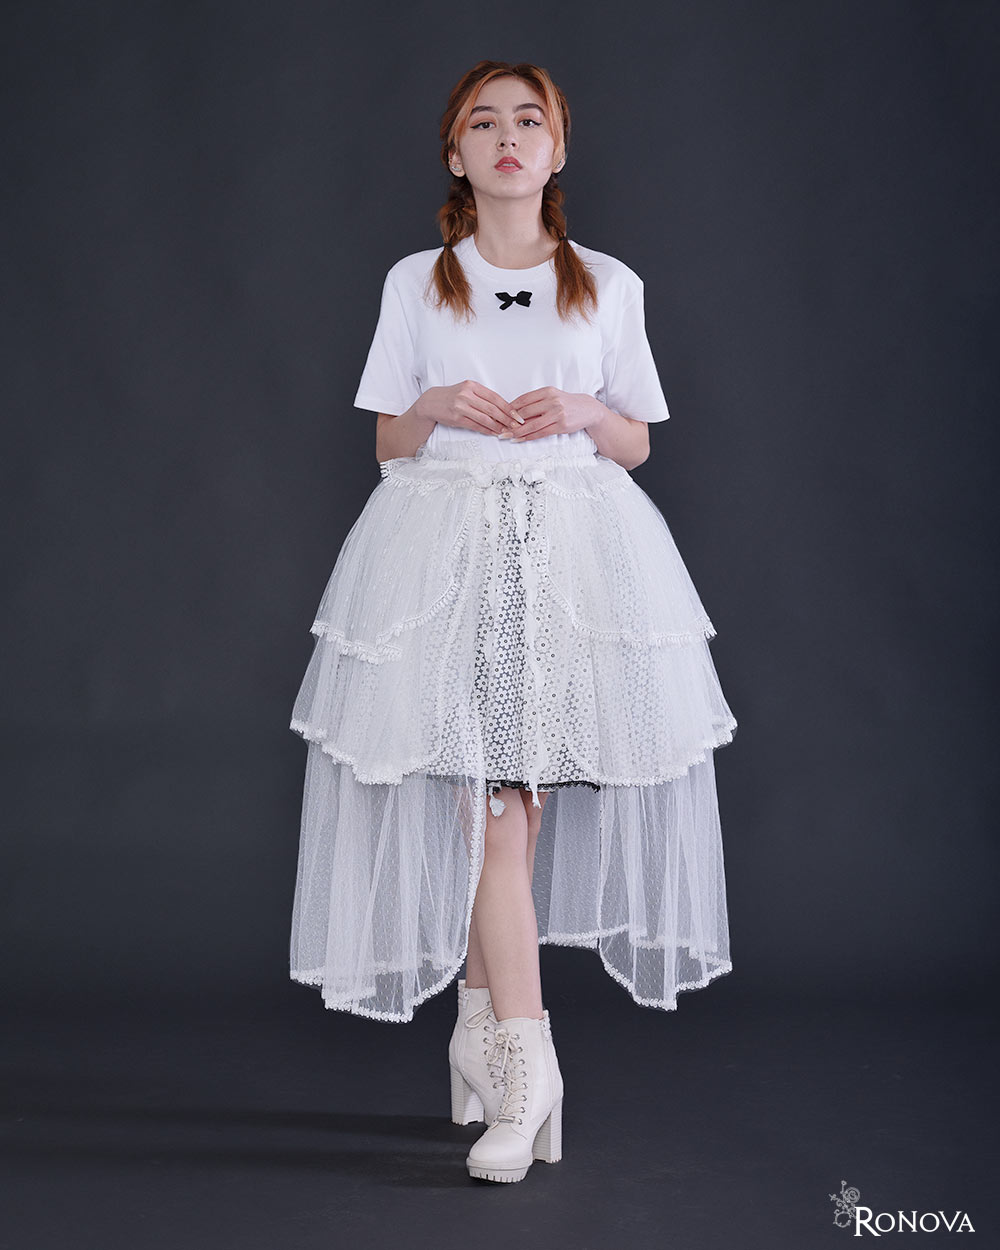 White Ronova Overskirt with Lace Trim and Silver Accents